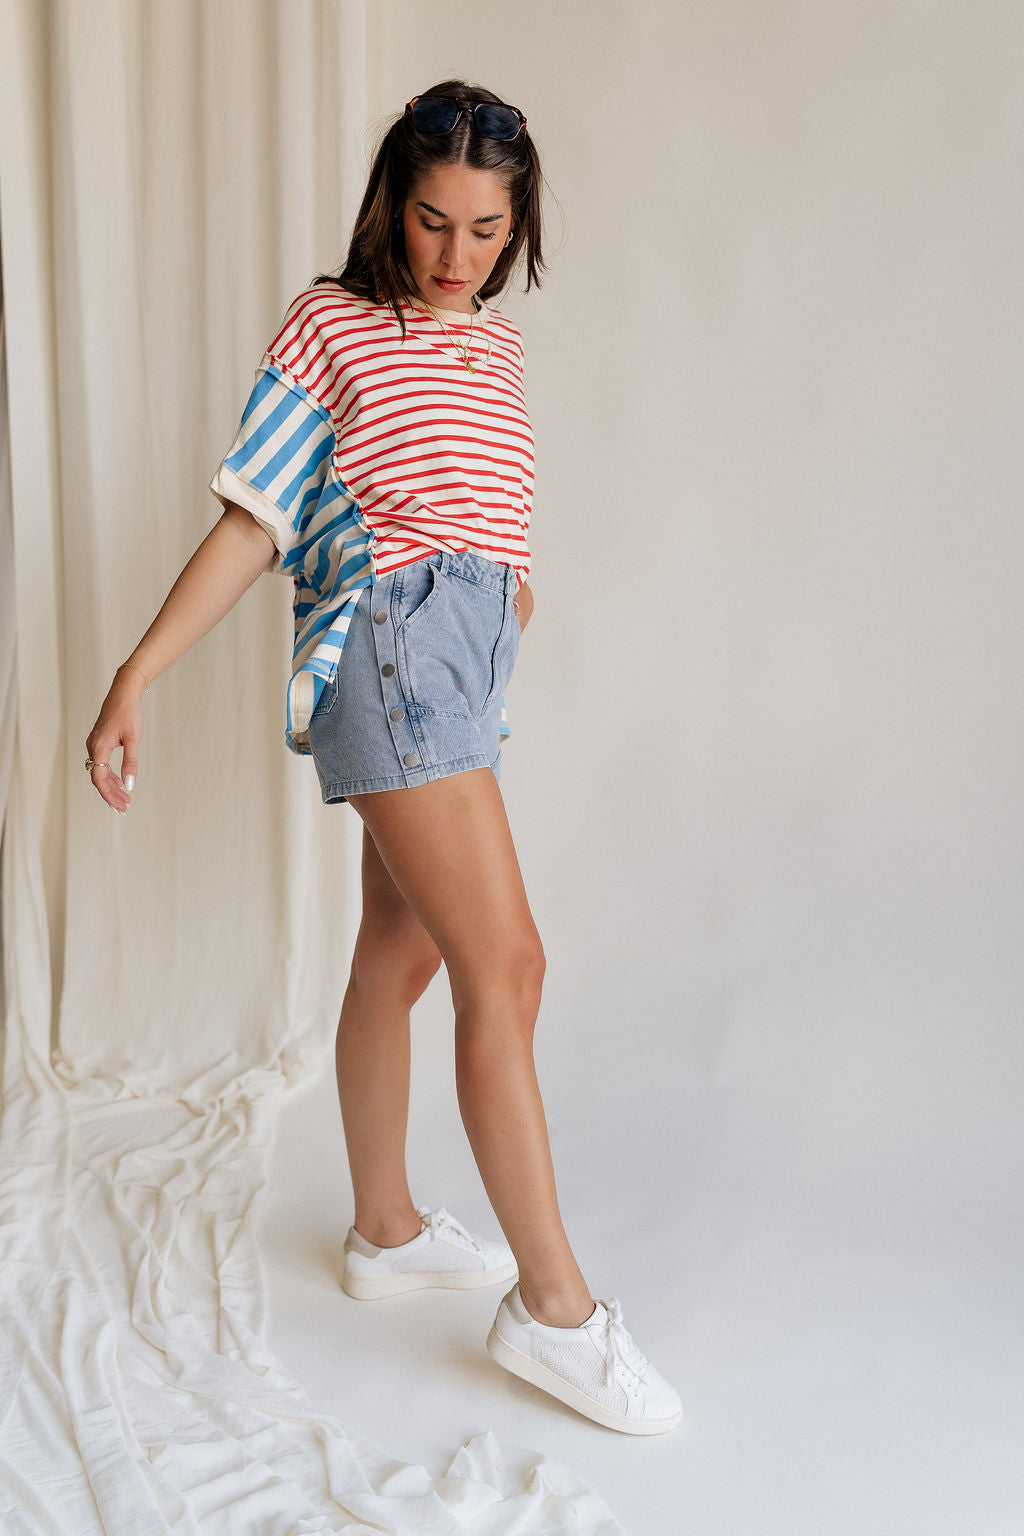 Full body side view of female model wearing the Hailey Silver Stud Denim Shorts that have light wash denim, silver stud details, pockets, and a front zipper.